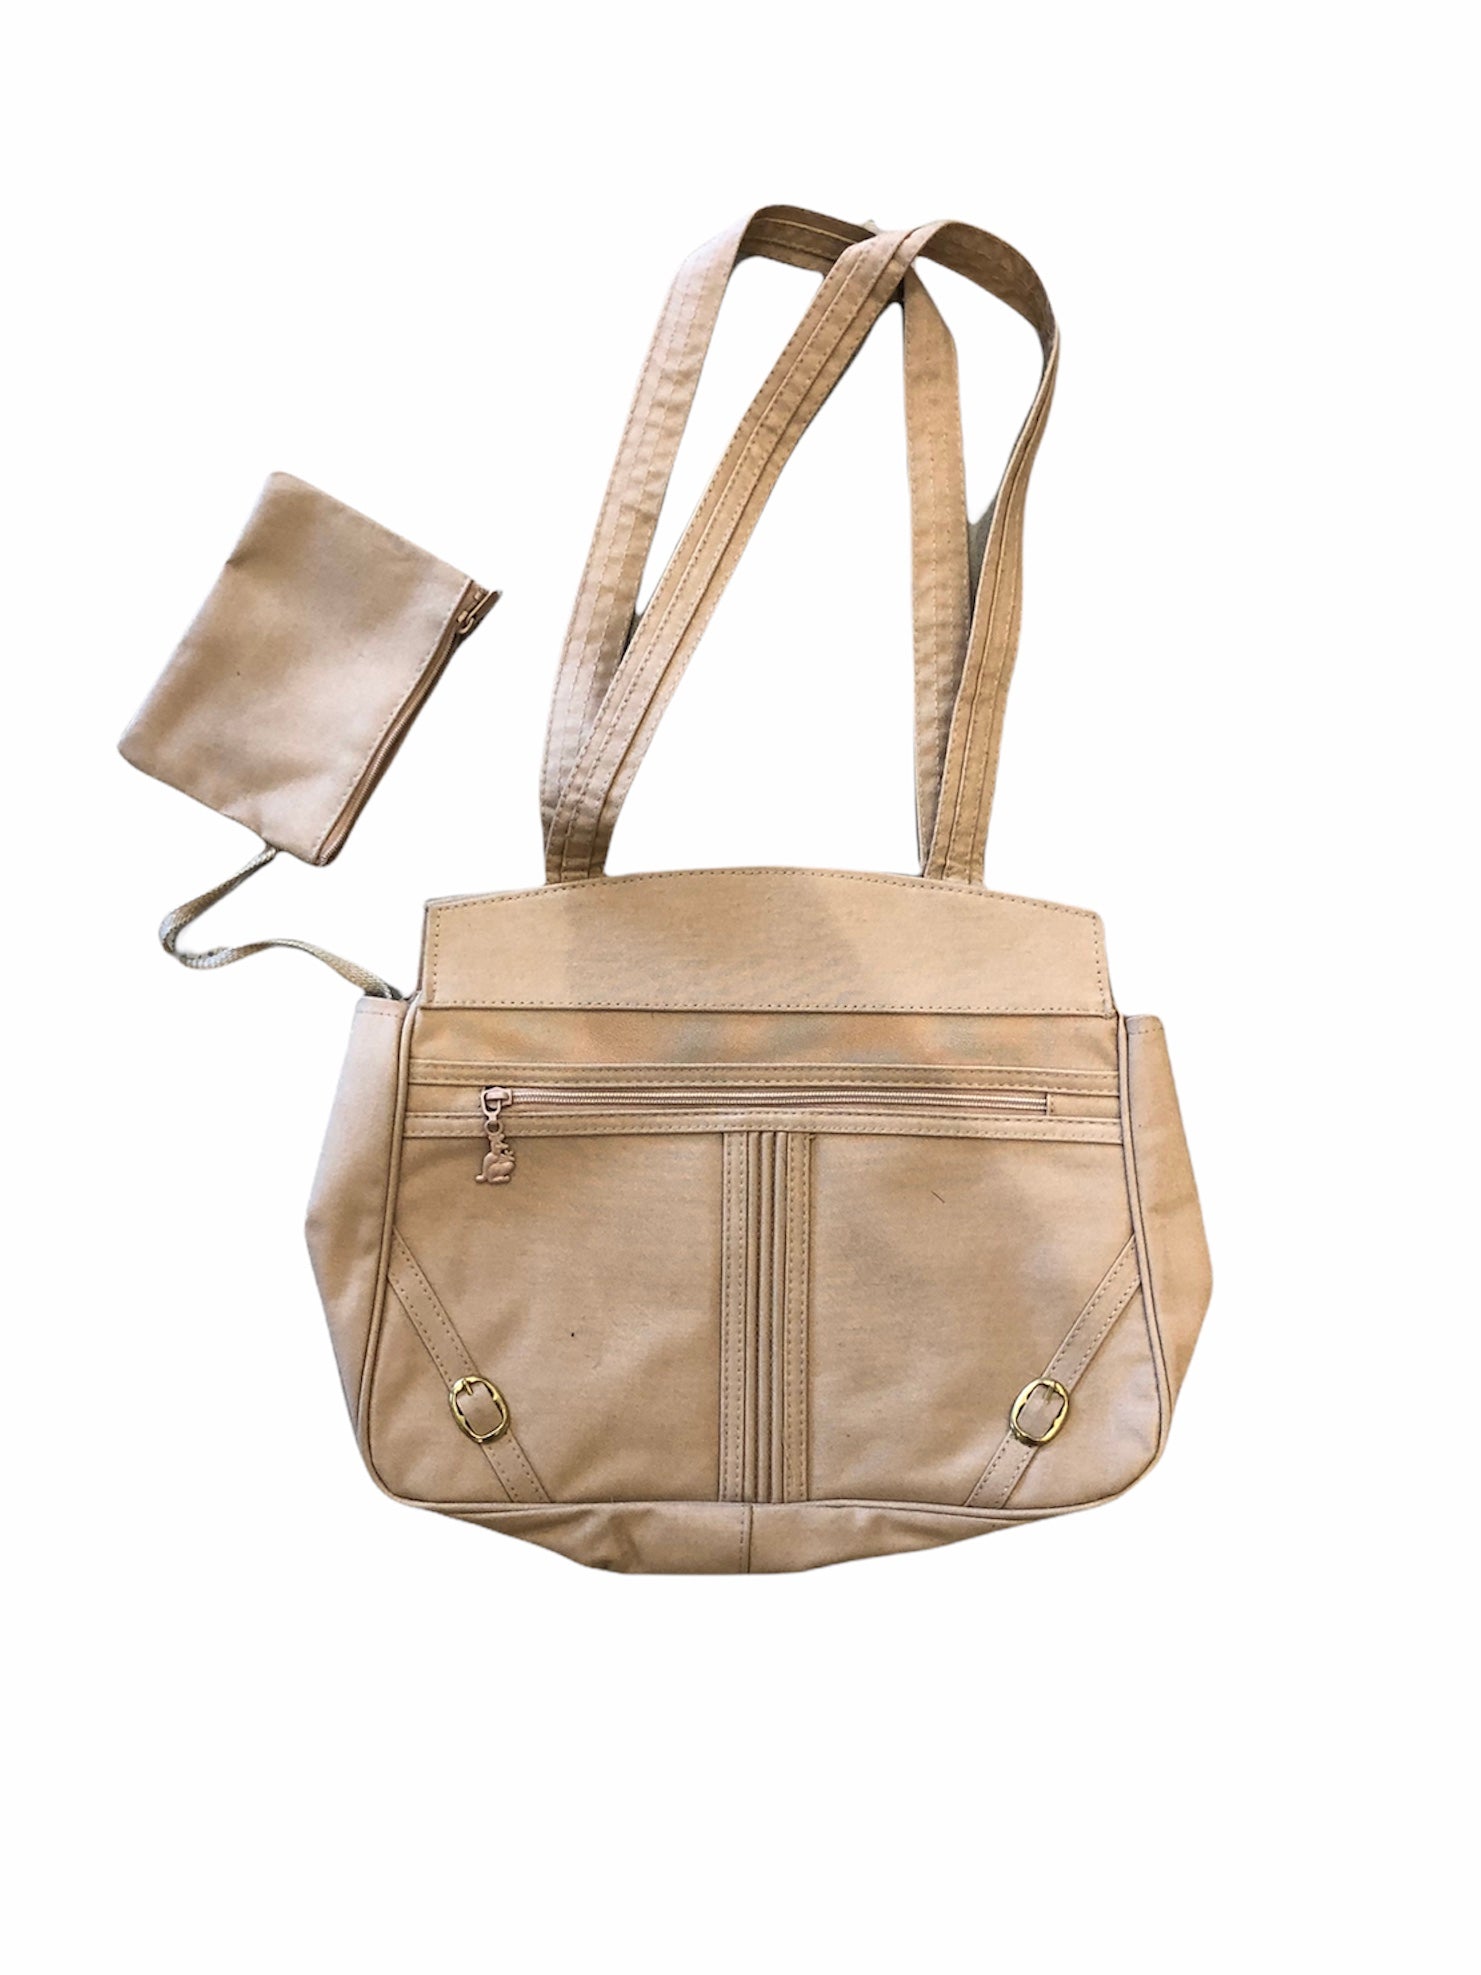 Structured Khaki Handbag with Attached Coin Purse- VC